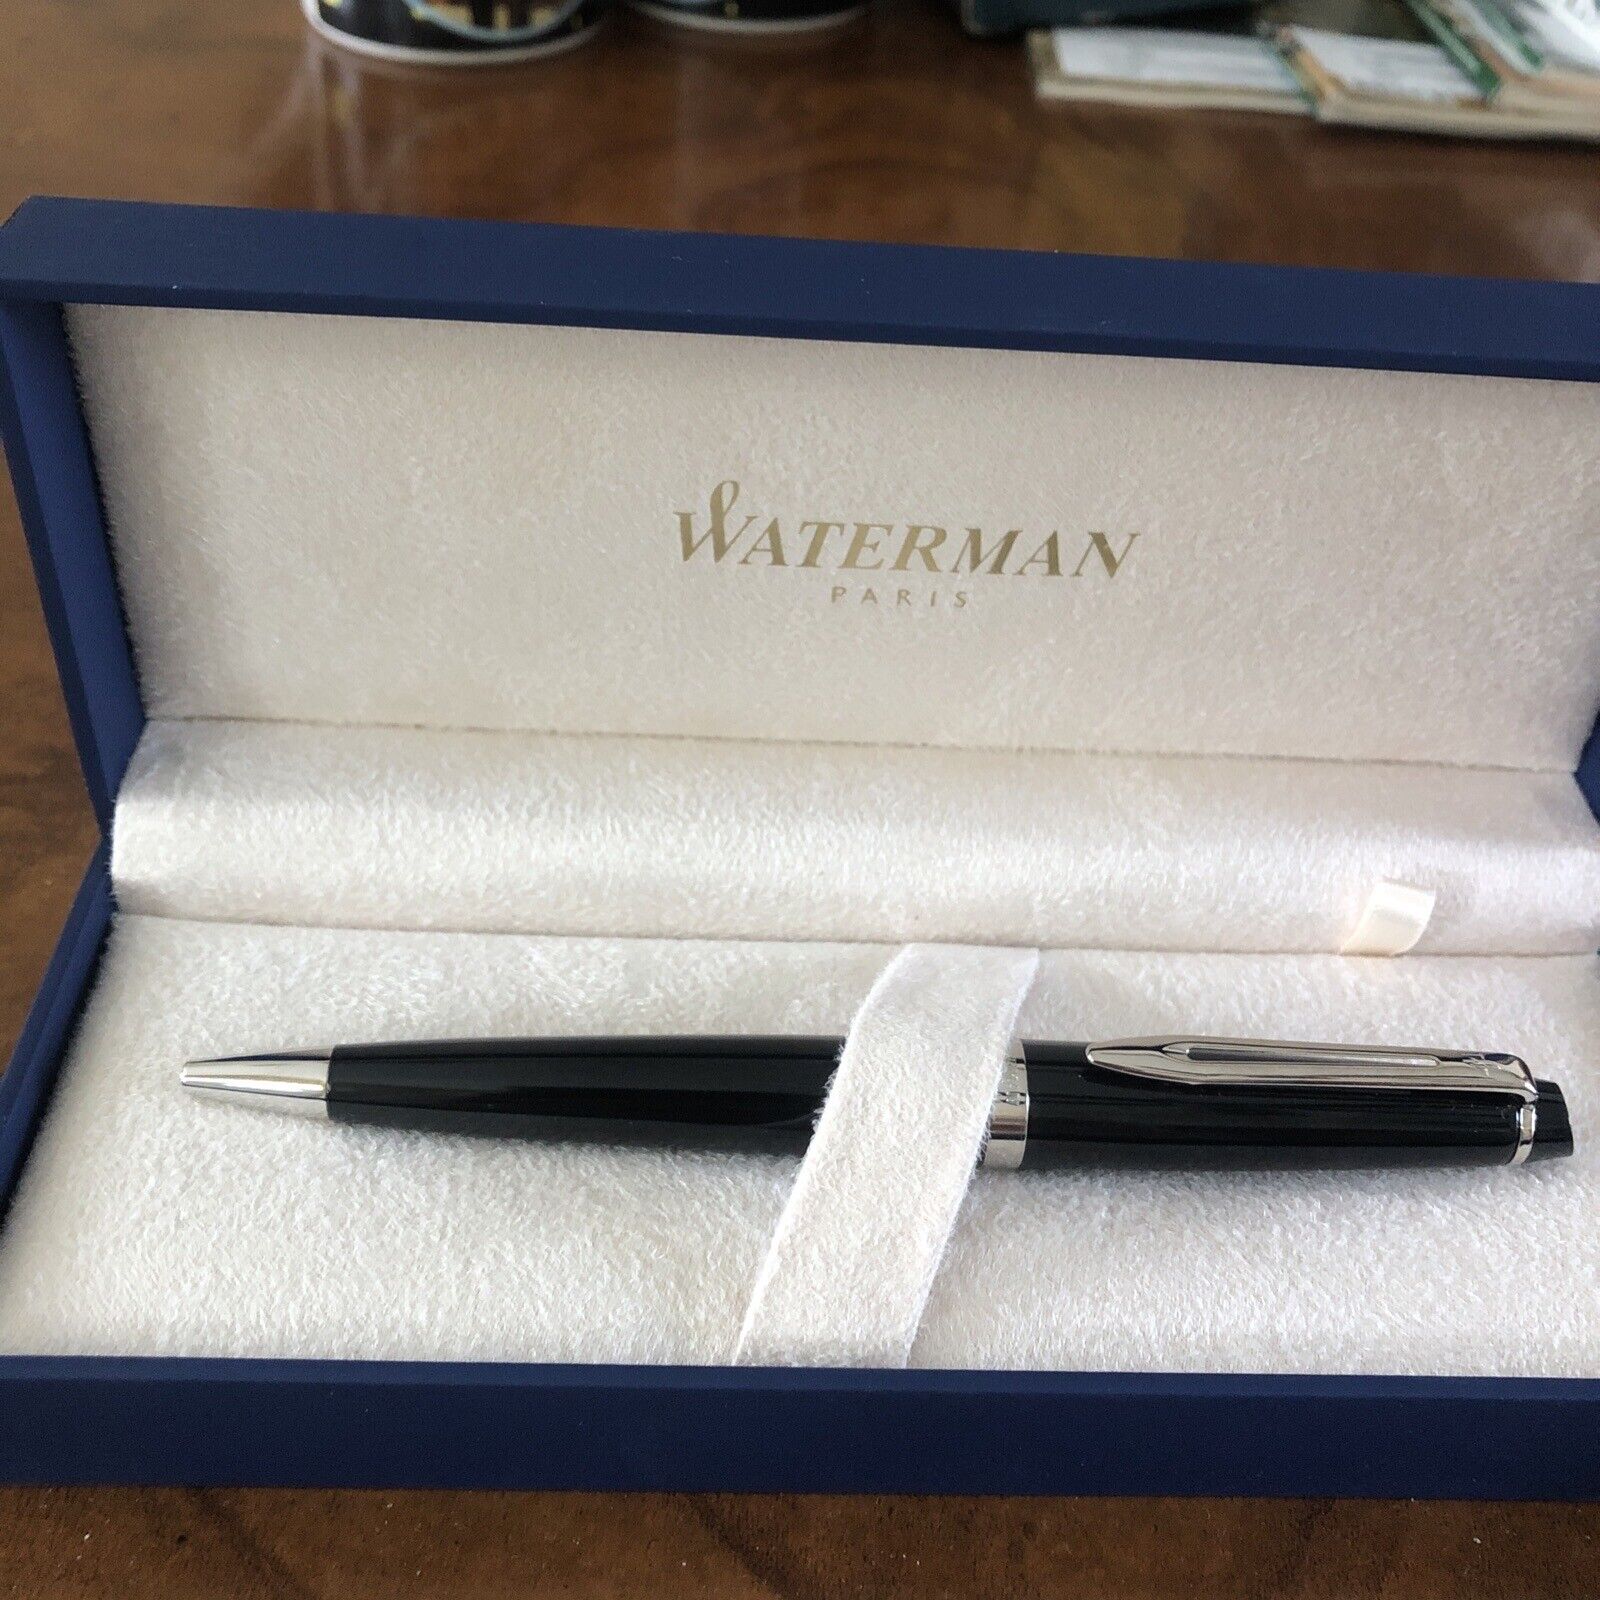 Waterman Pen Brand New In Box. Glossy Black With Silver Trim. Writes Beautiful.